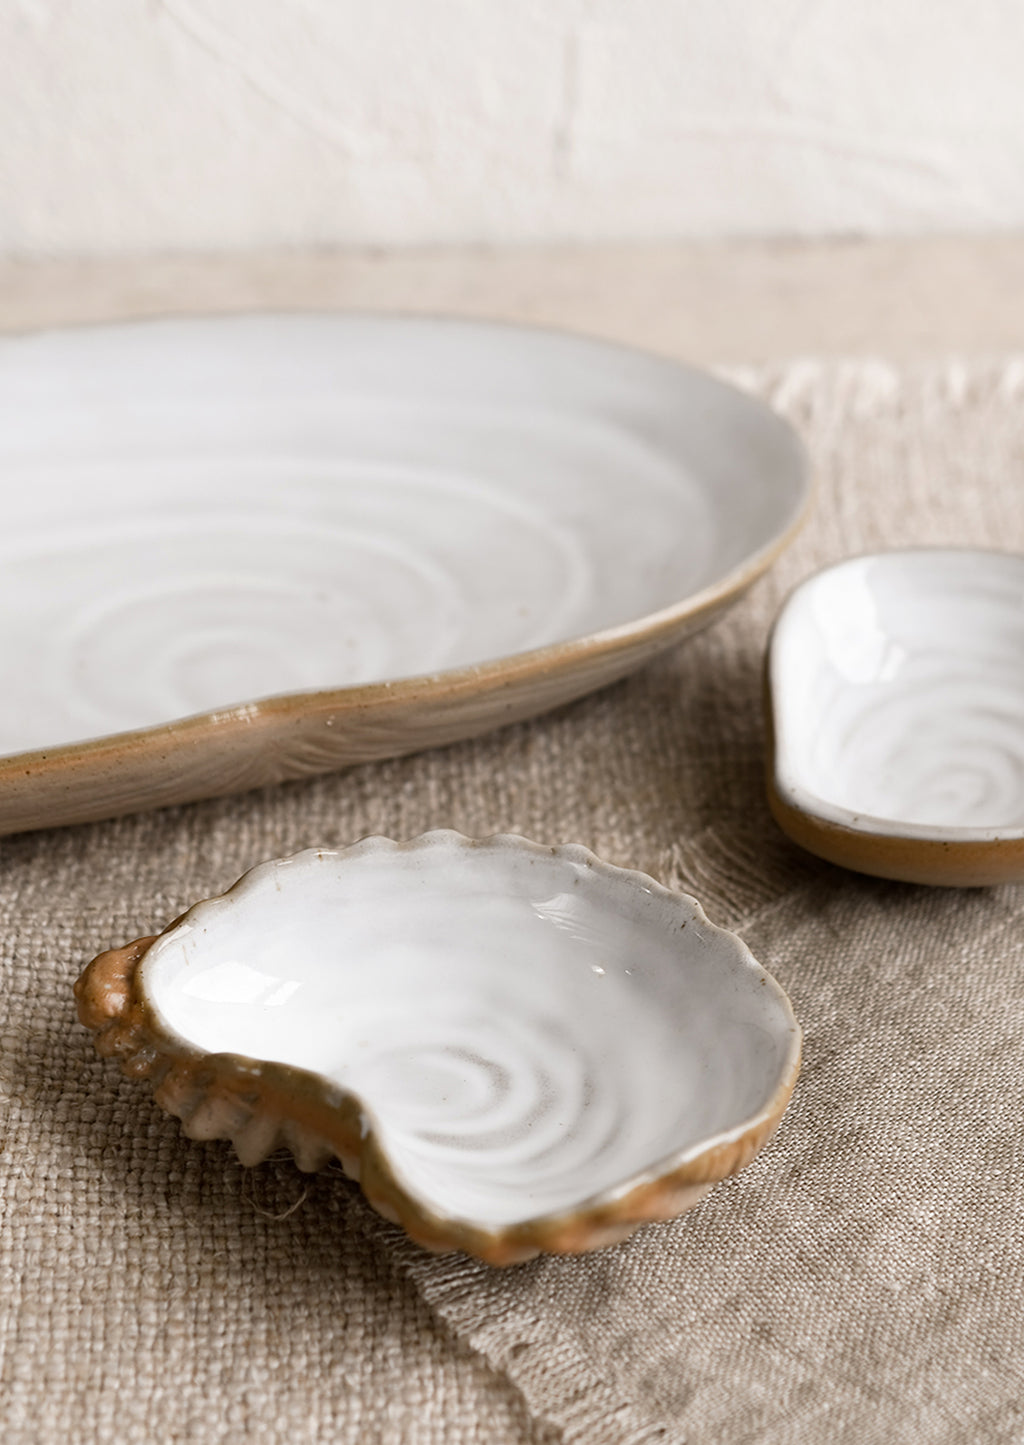 1: Ceramic serving dishes that look like shells.